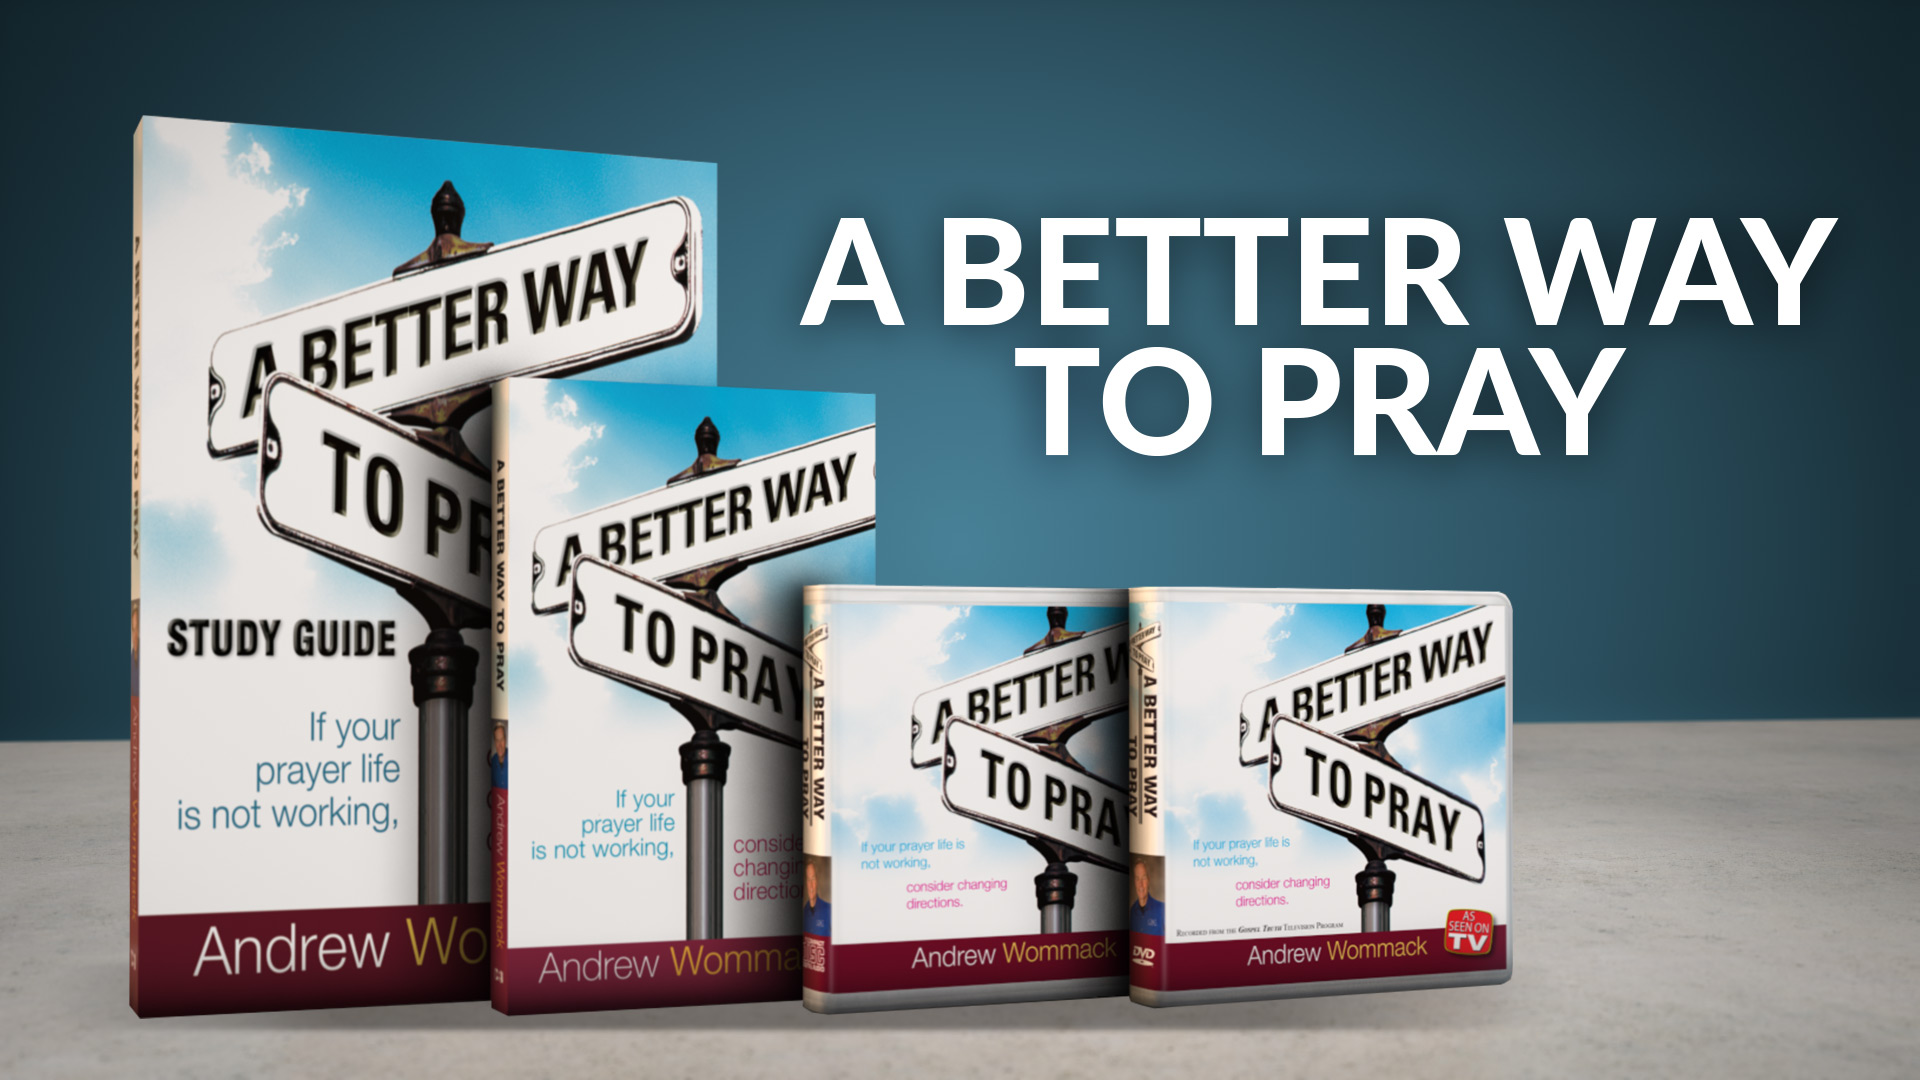 A Better Way to Pray Products Banner